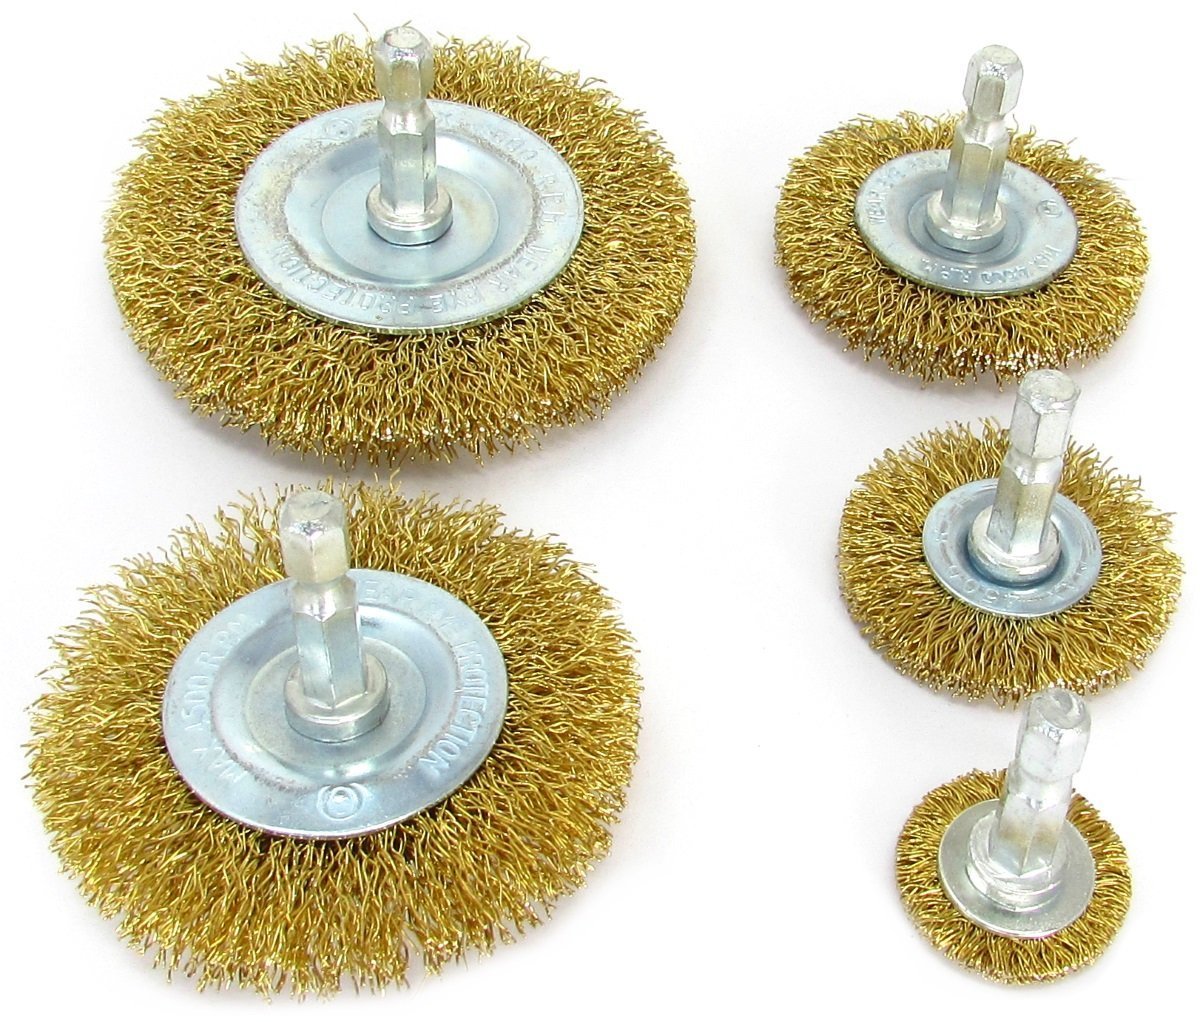 5px Circular Wire Wheel Brushes for Drill